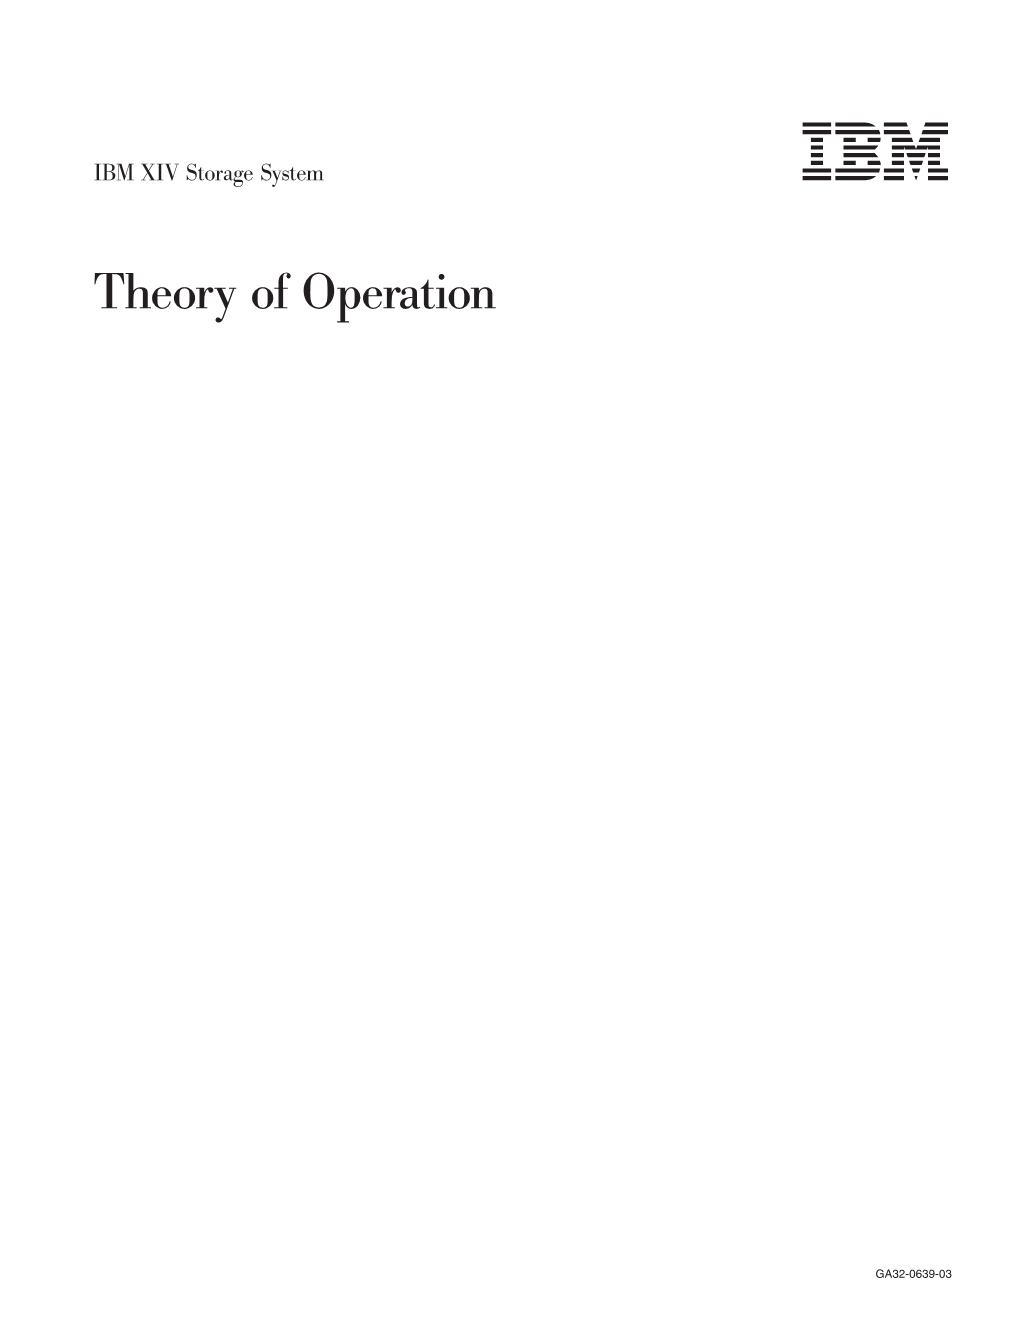 IBM XIV Storage System: Theory of Operation Introduction